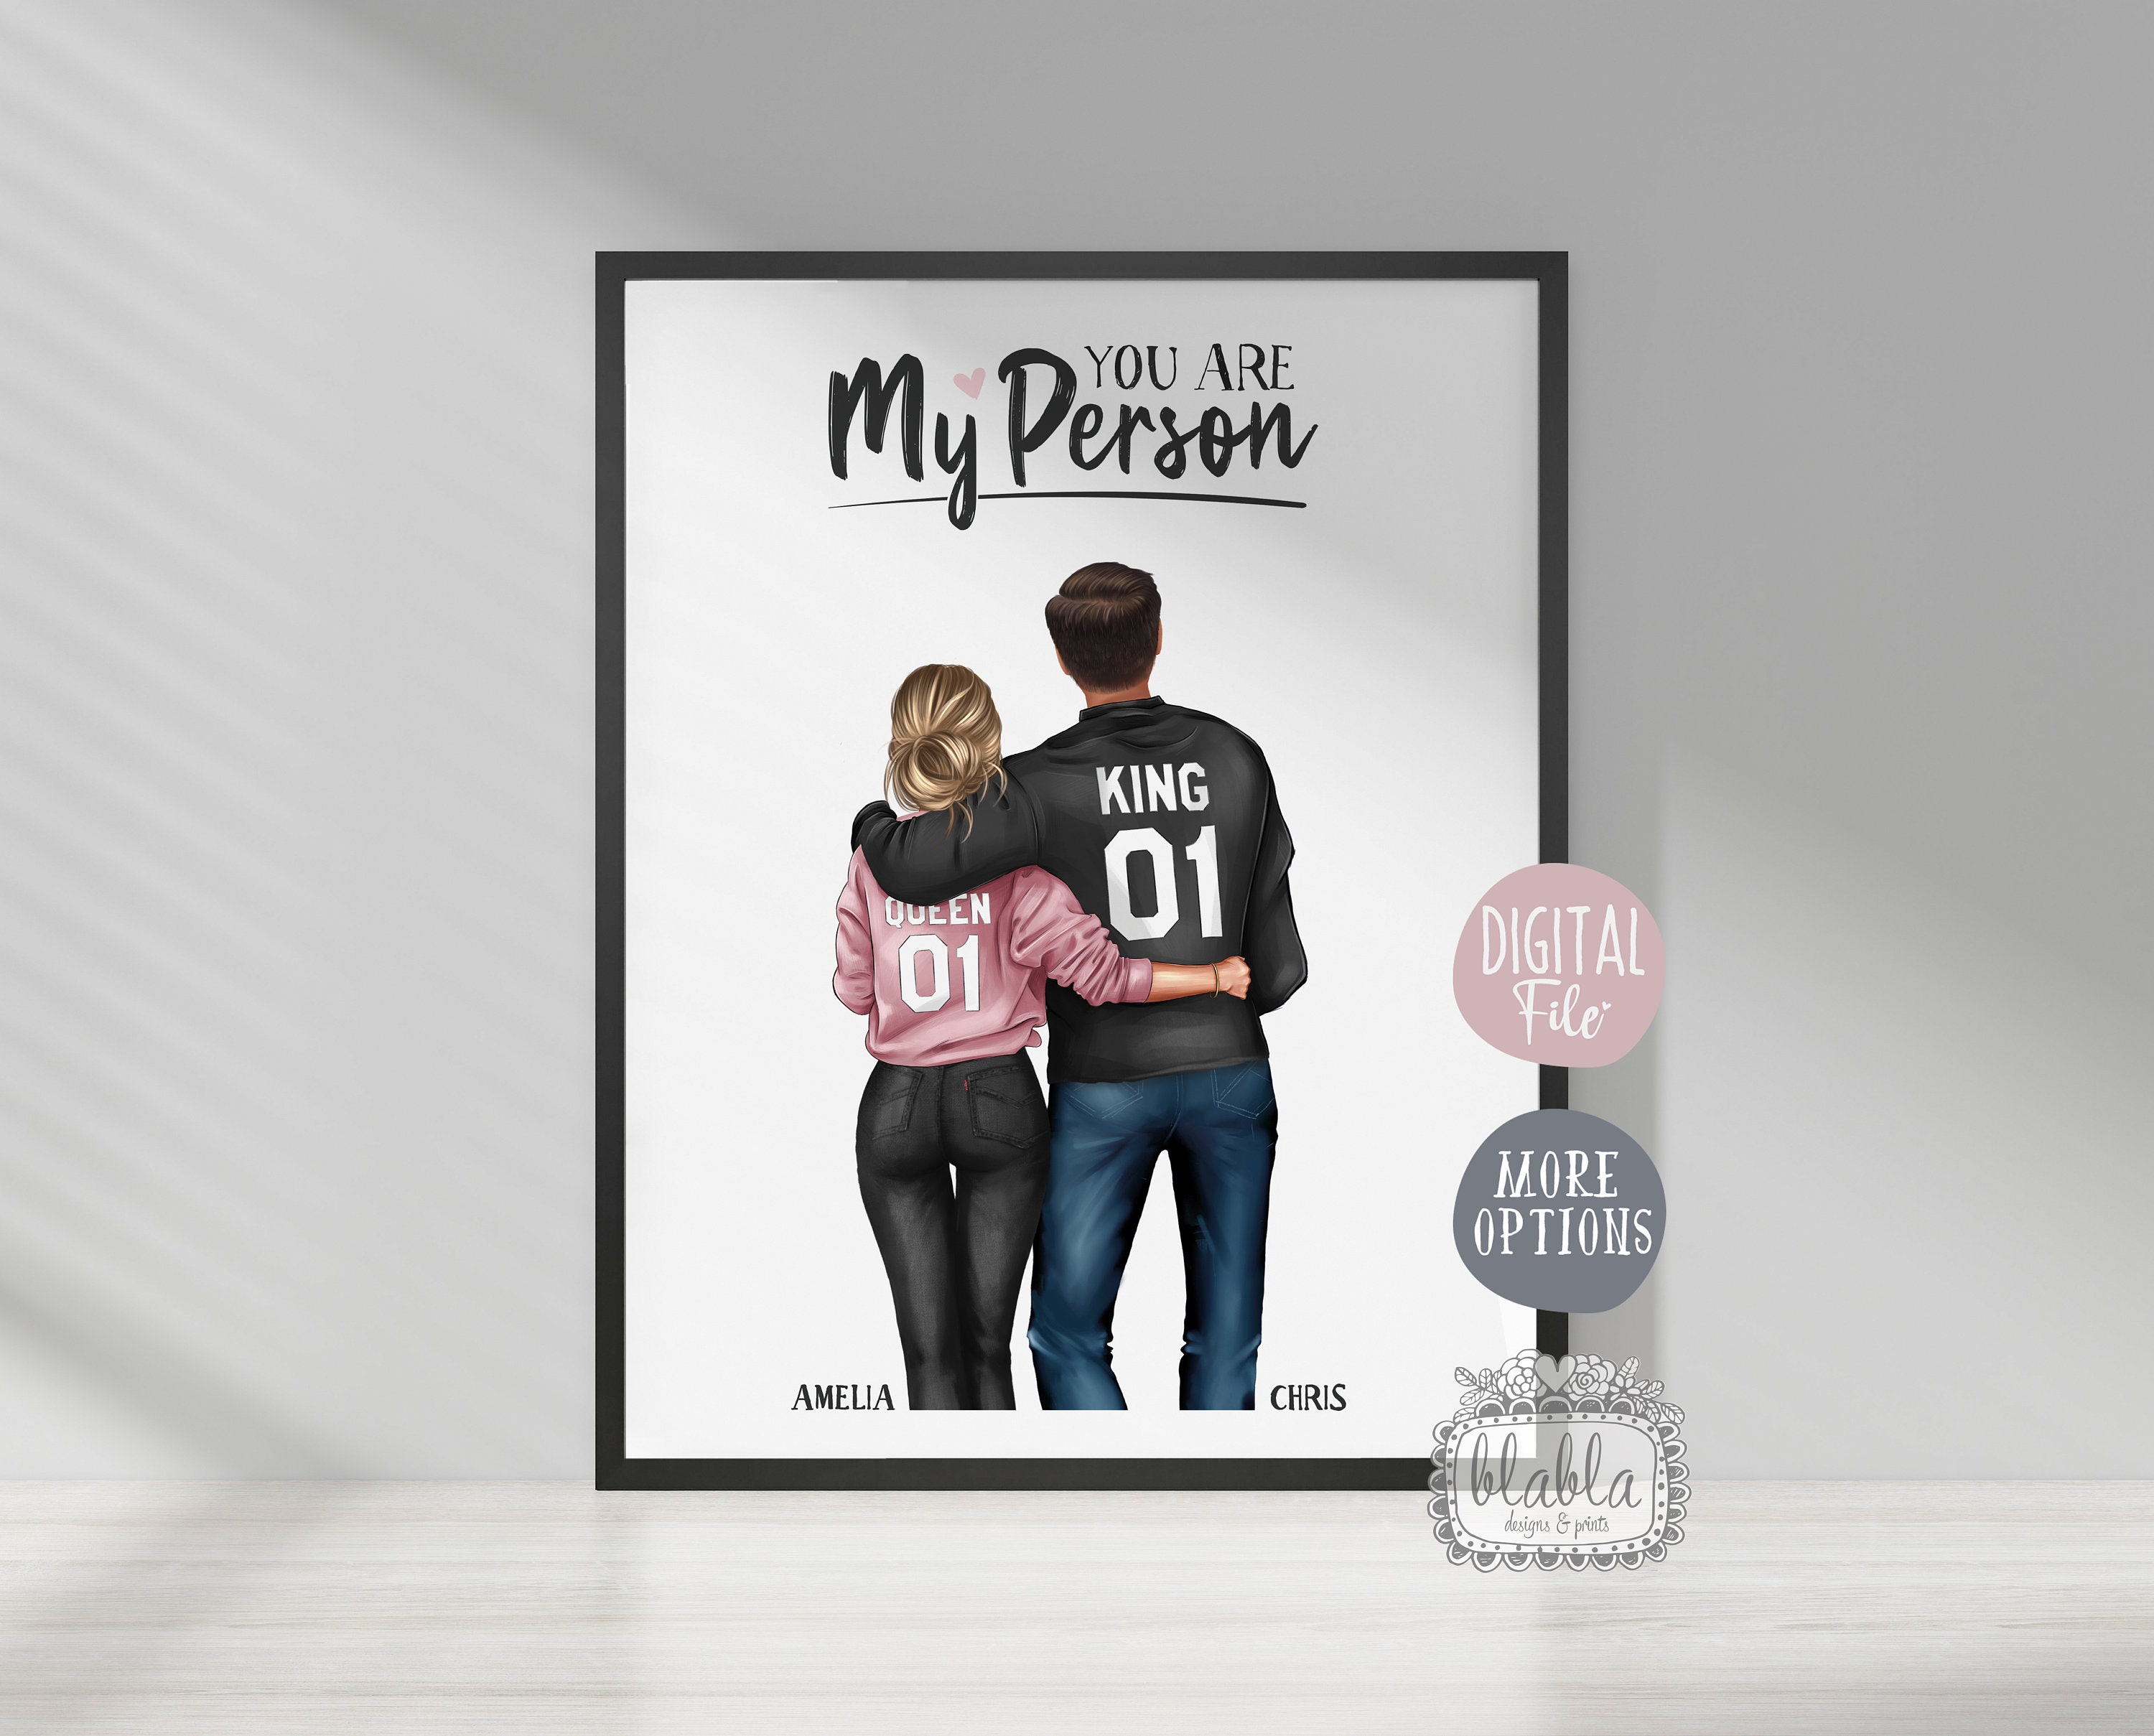 Personalised Gifts for Boyfriend - Buy/send Personalised Gifts for Boyfriend  Online @Giftalove